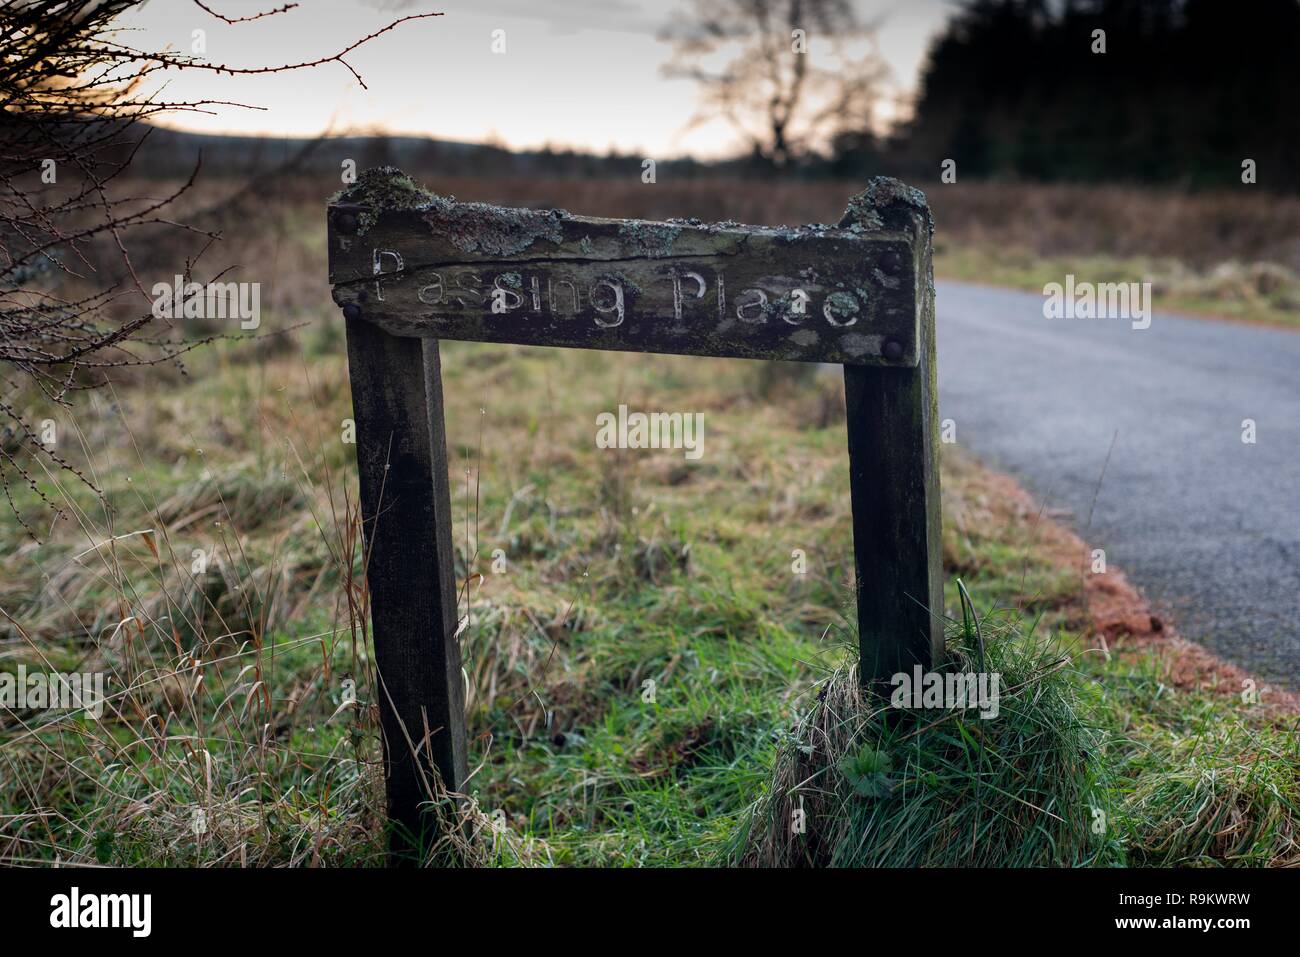 old signpost saying passing place Stock Photo